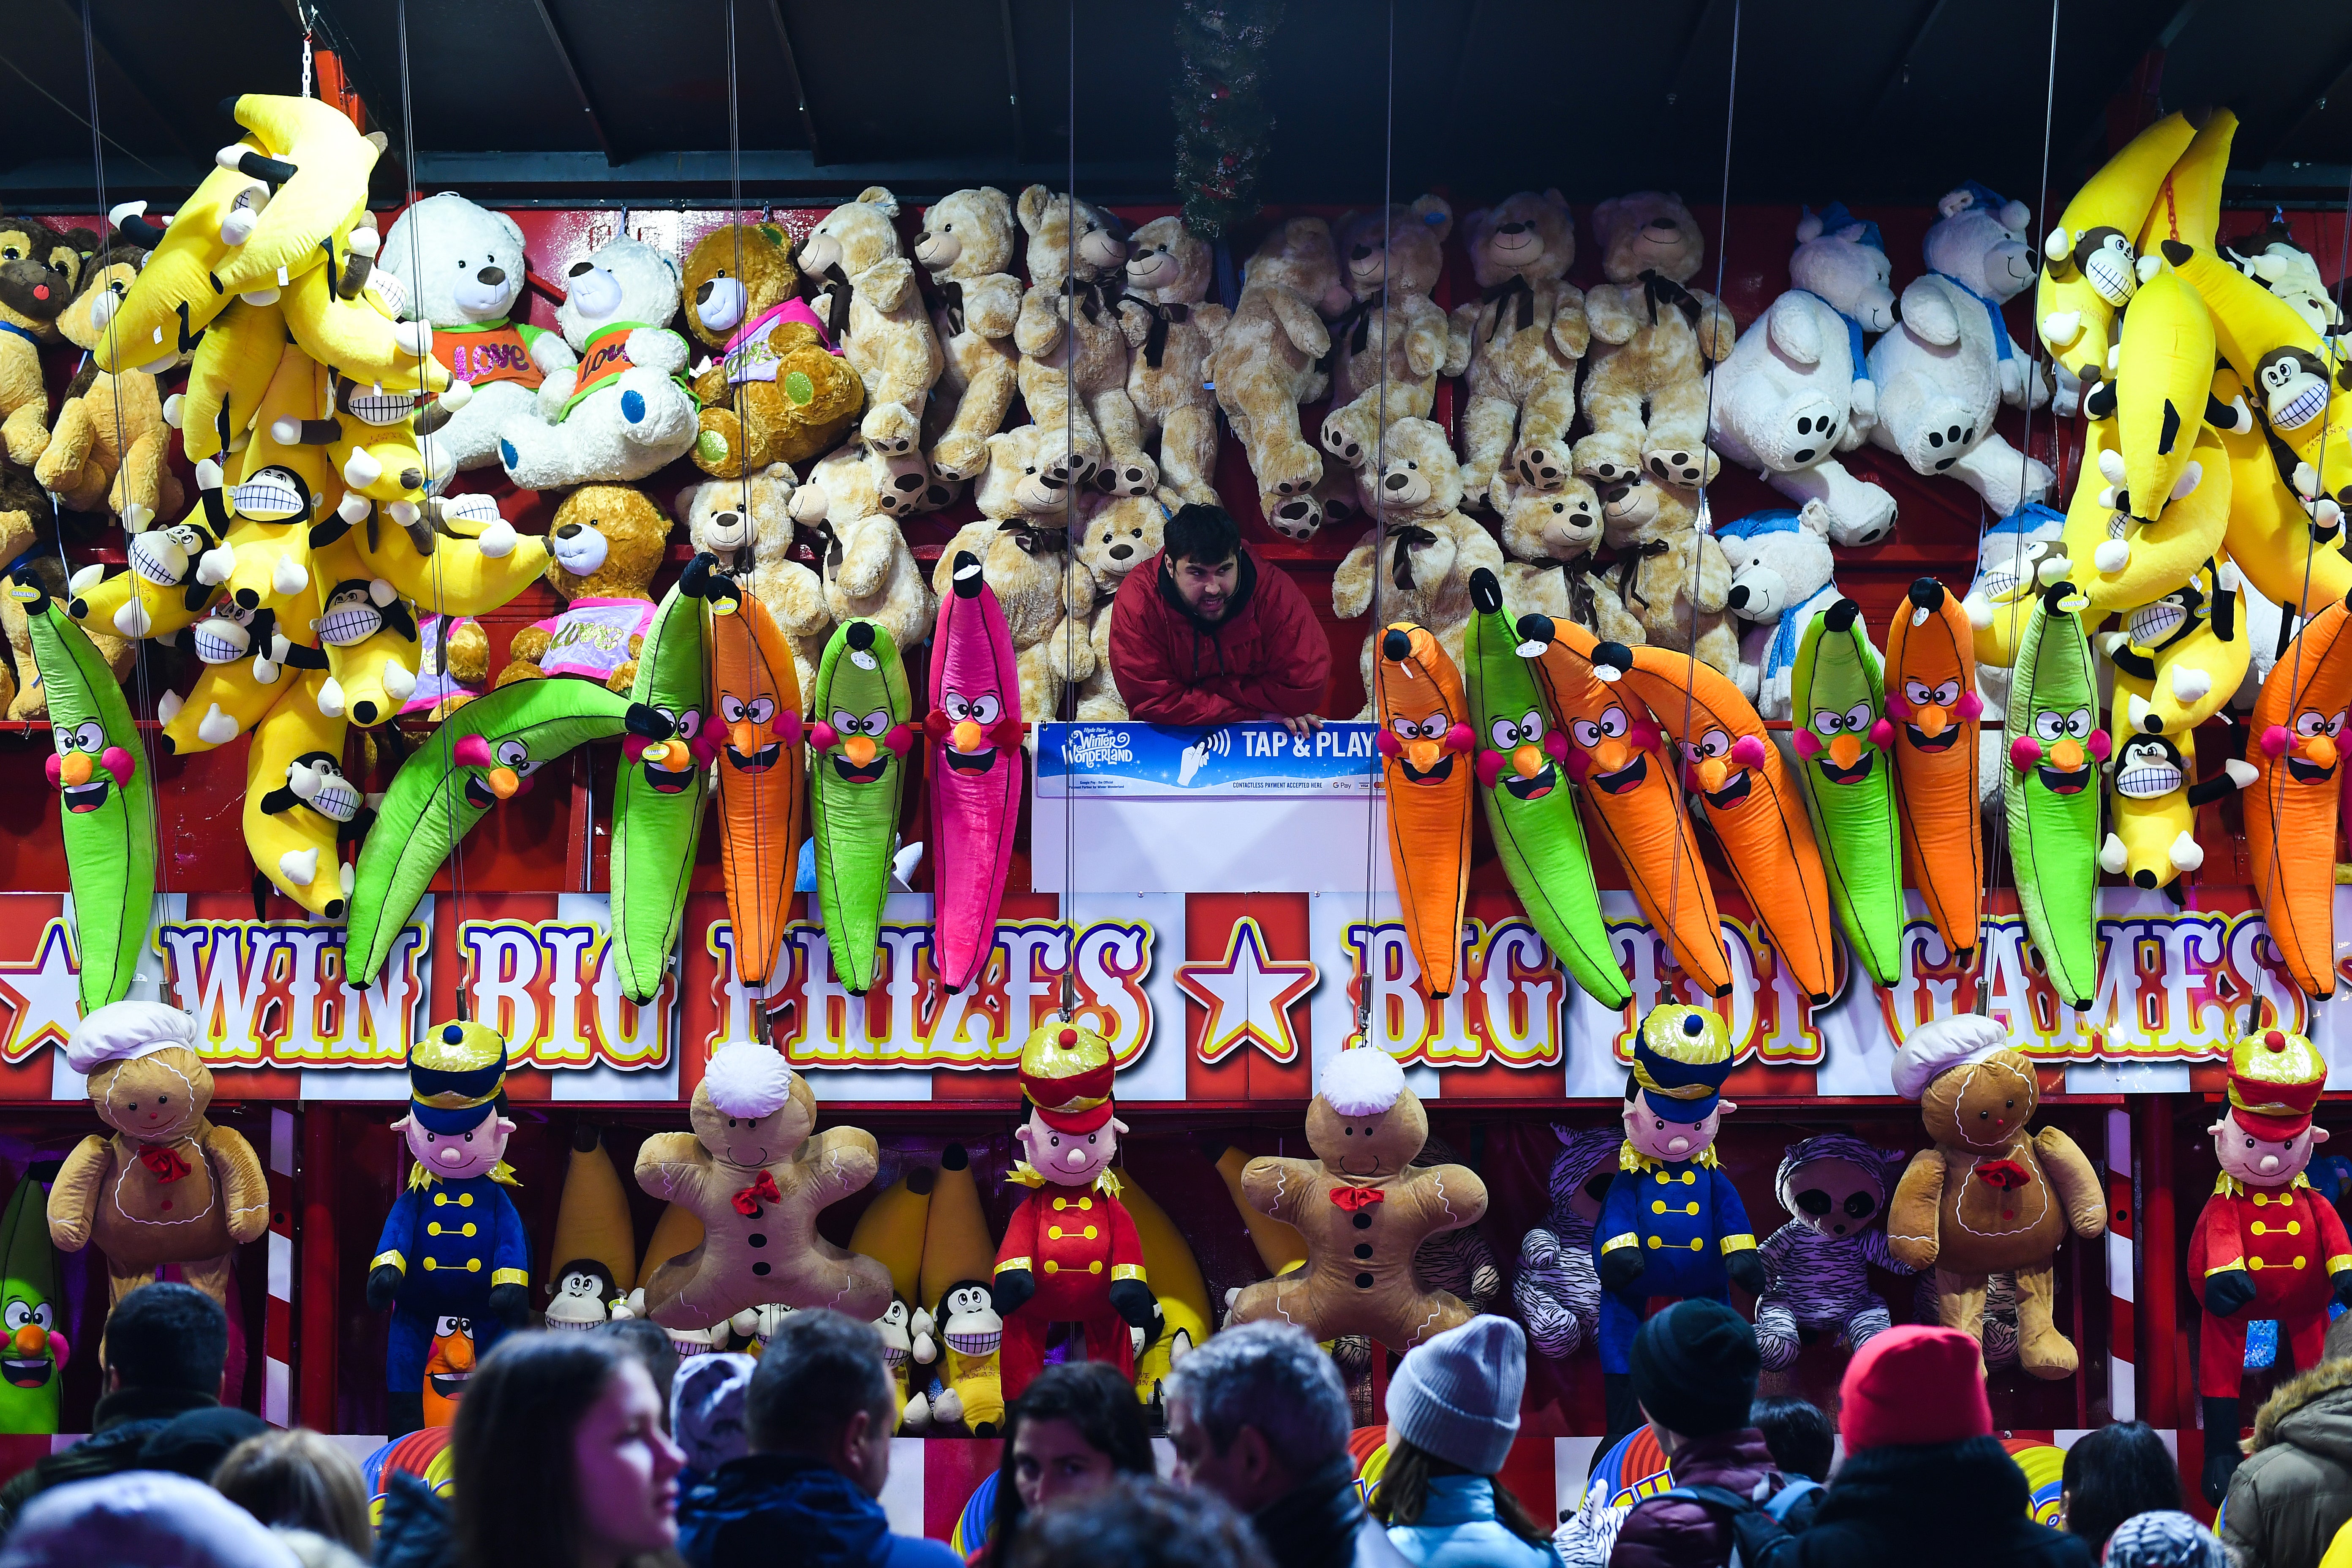 Between the entry fee, games, activities and food, prices can stack up at Winter Wonderland